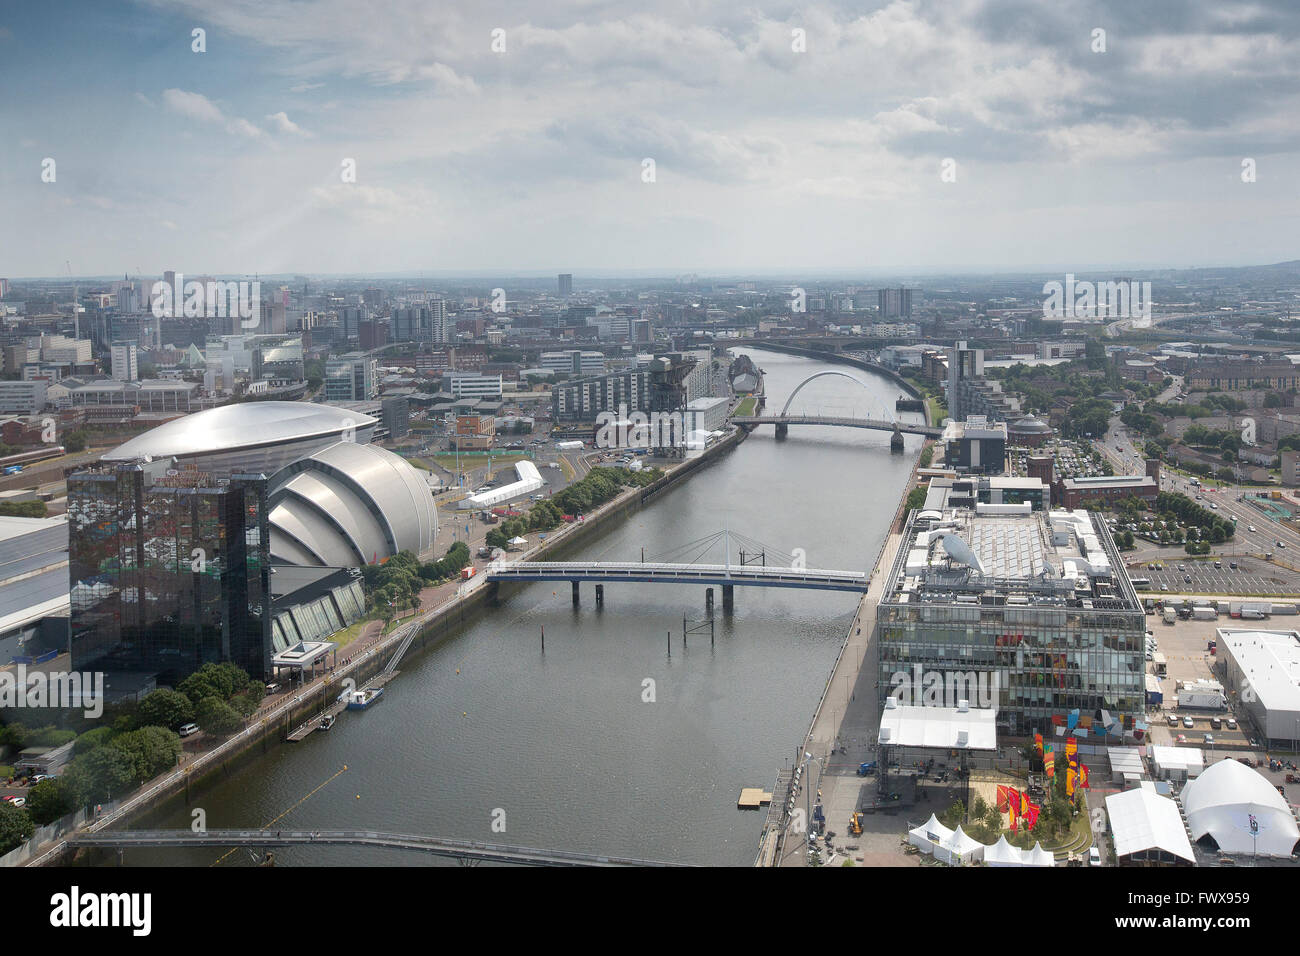 View from the Glasgow Tower of Glasgow and the River Clyde that runs through the city. Stock Photo